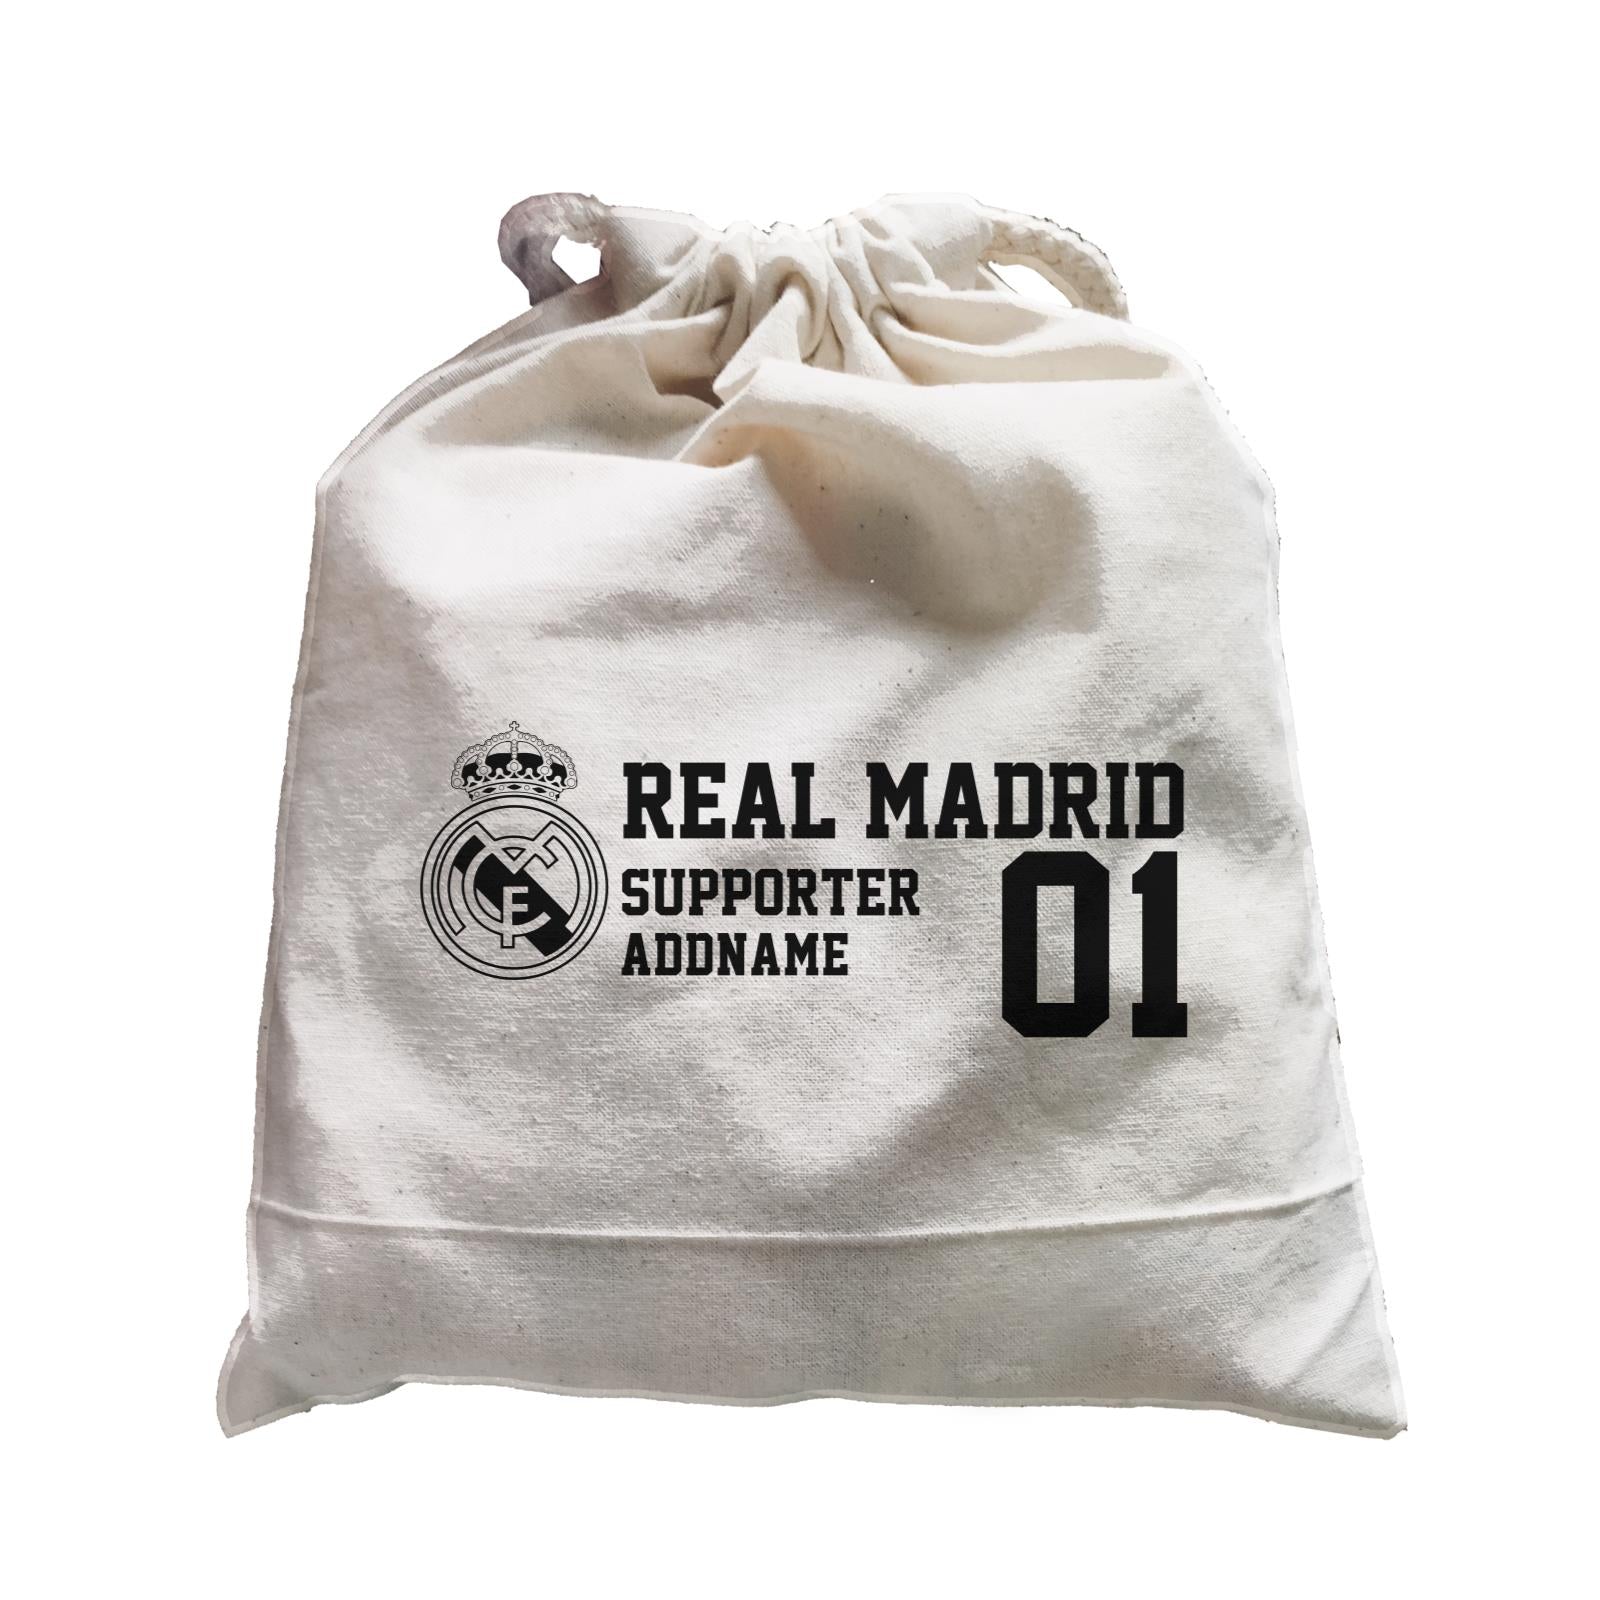 Real Madrid Football Supporter Accessories Addname Satchel